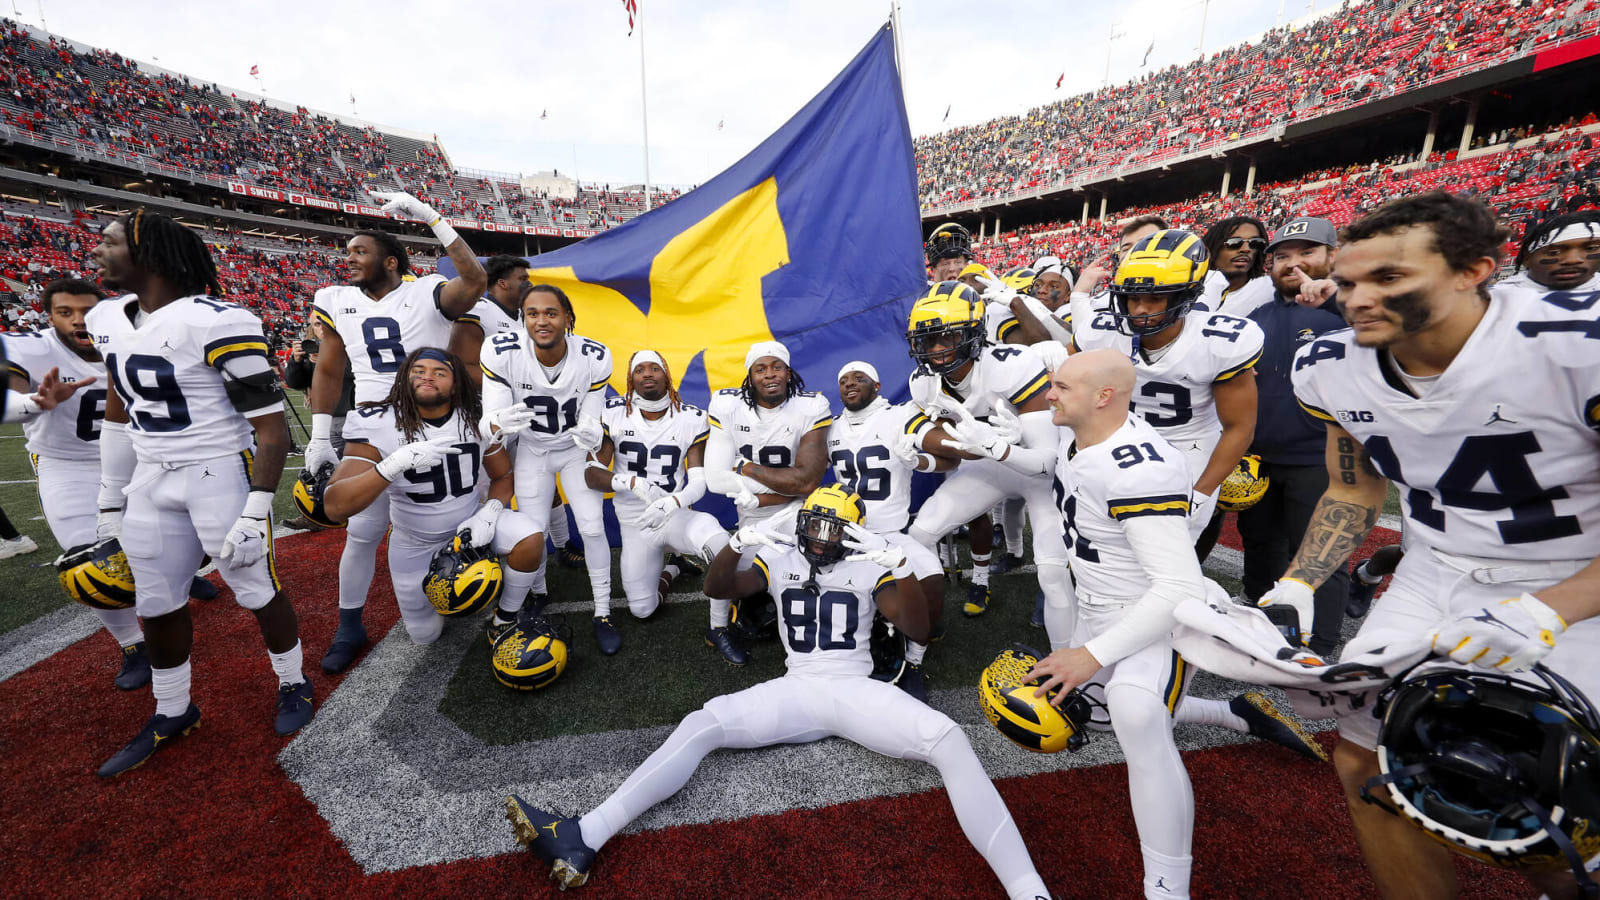 Michigan's offense pummels Ohio State in dominant win